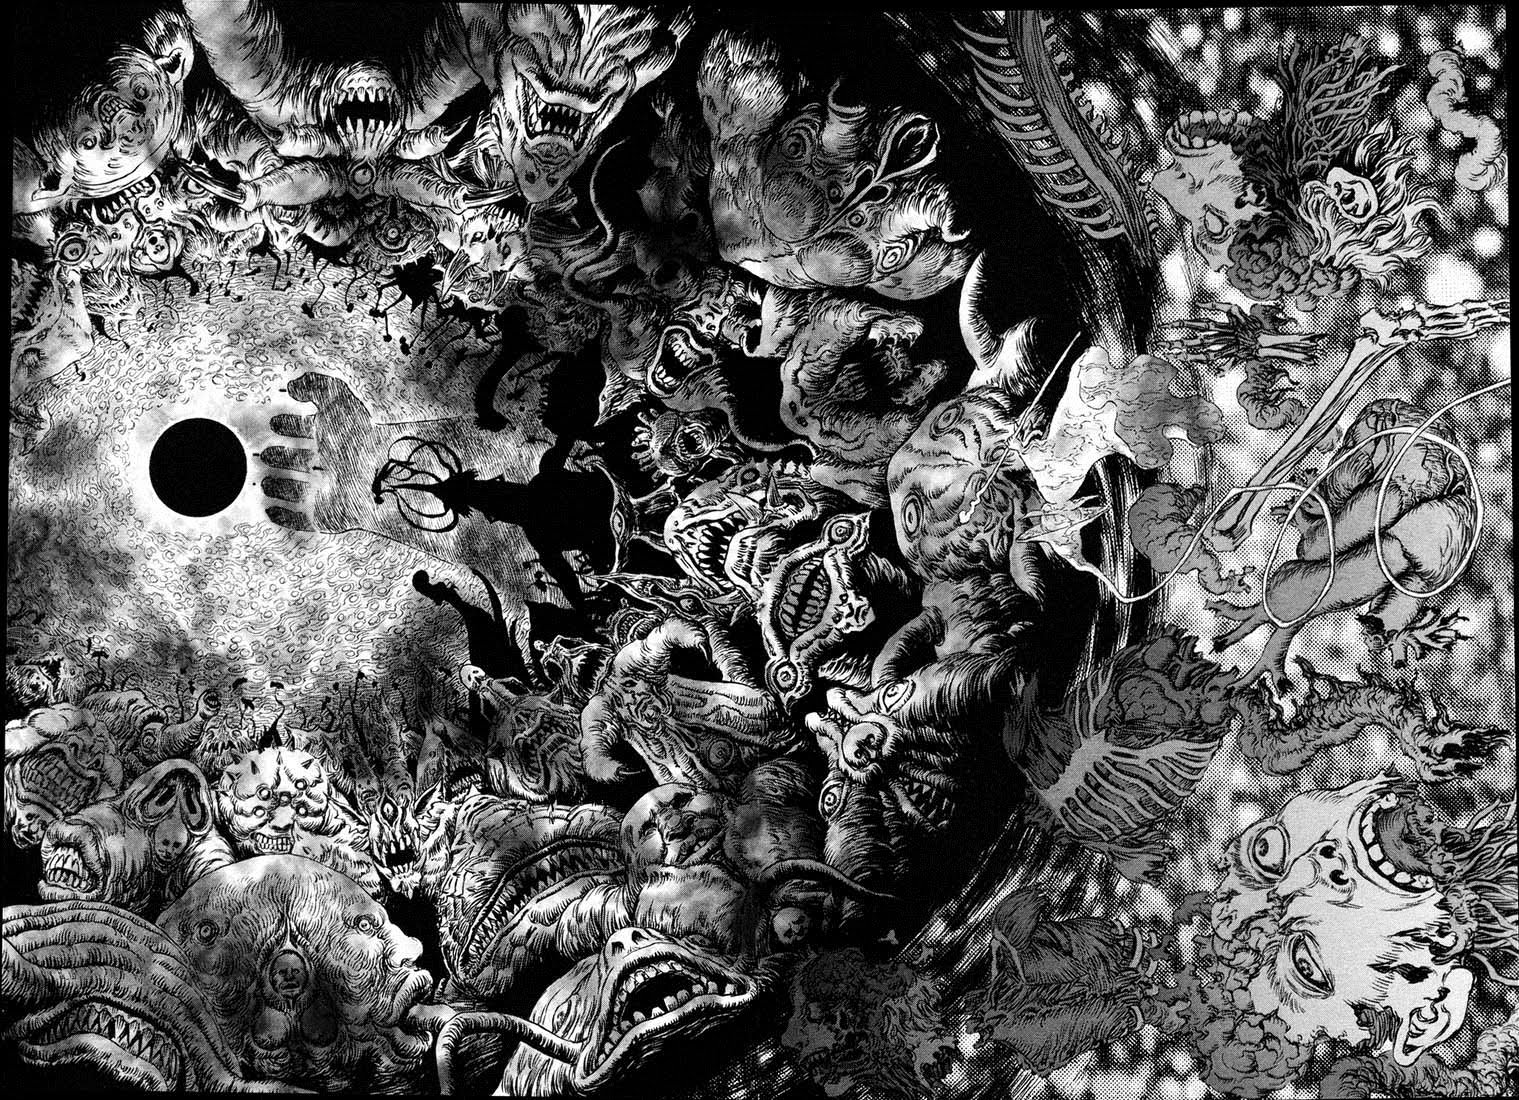 Guts' Memory of the Eclipse: God Hand in clear focus with the eclipse to the nightmarish apostles from Berserk